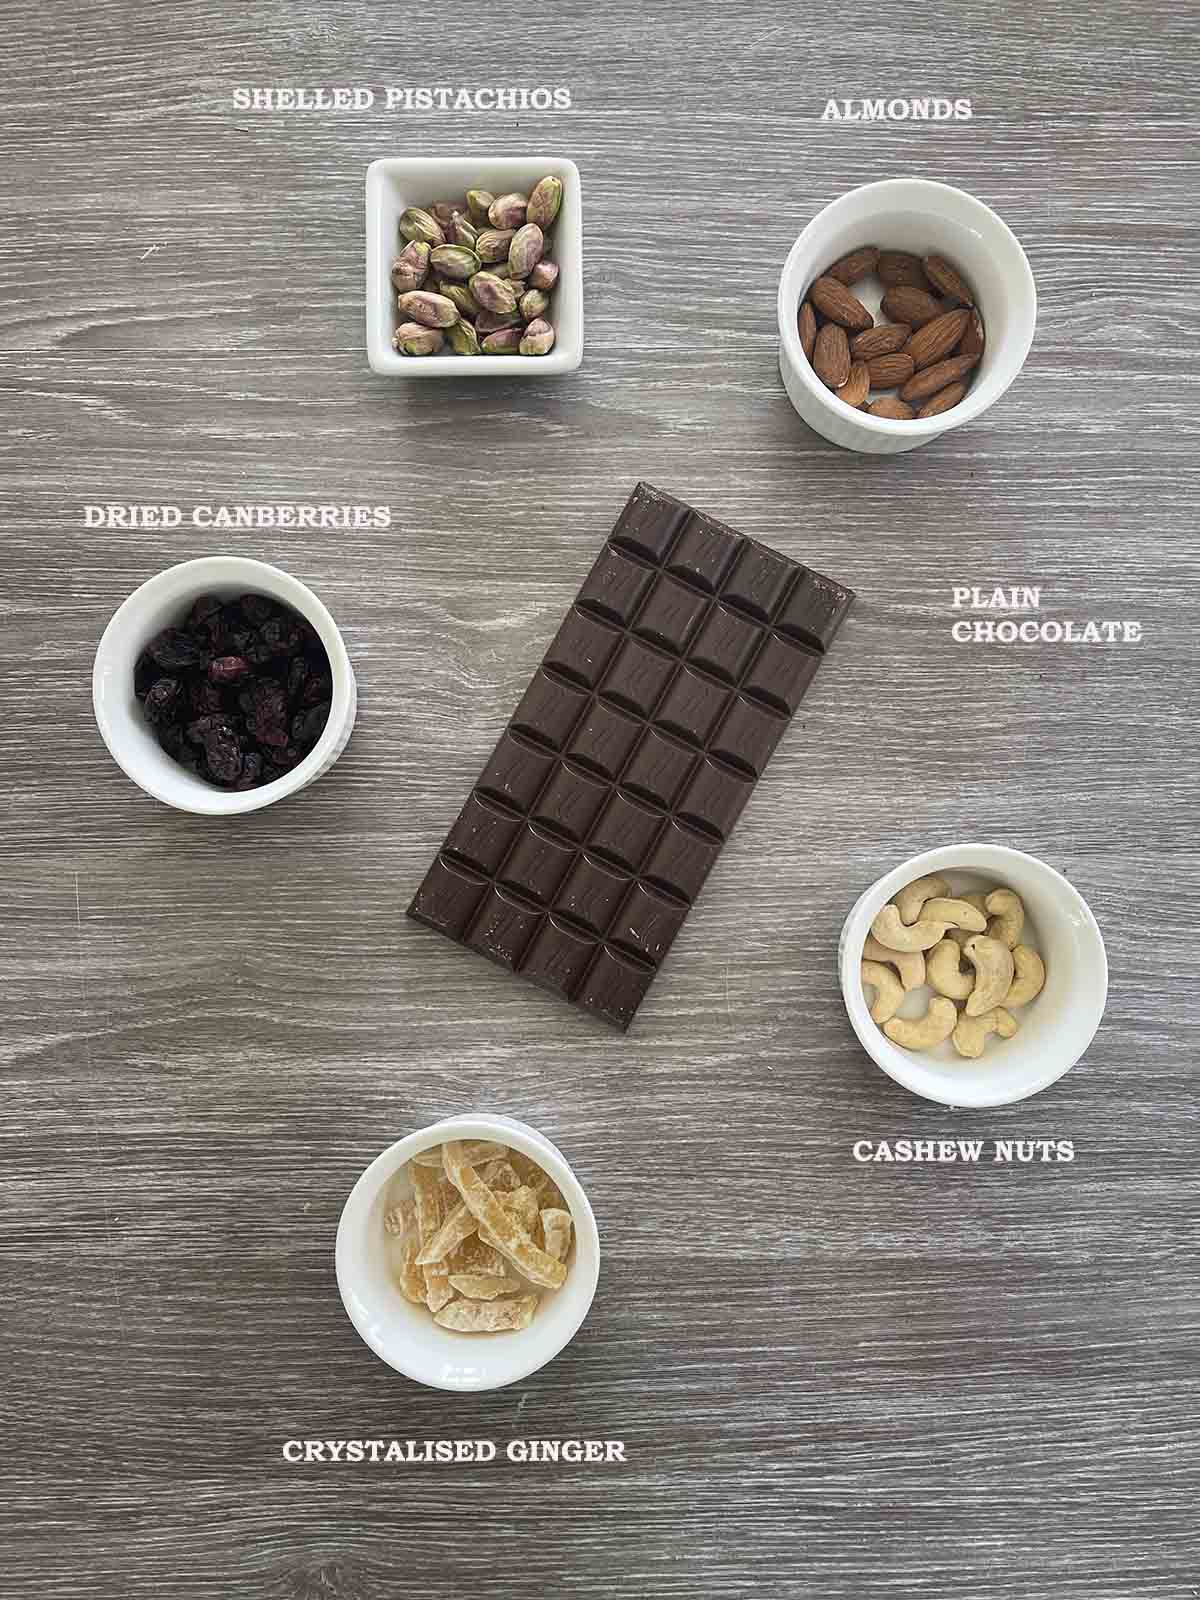 ingredients including chocolate, ginger, cranberries and nuts.